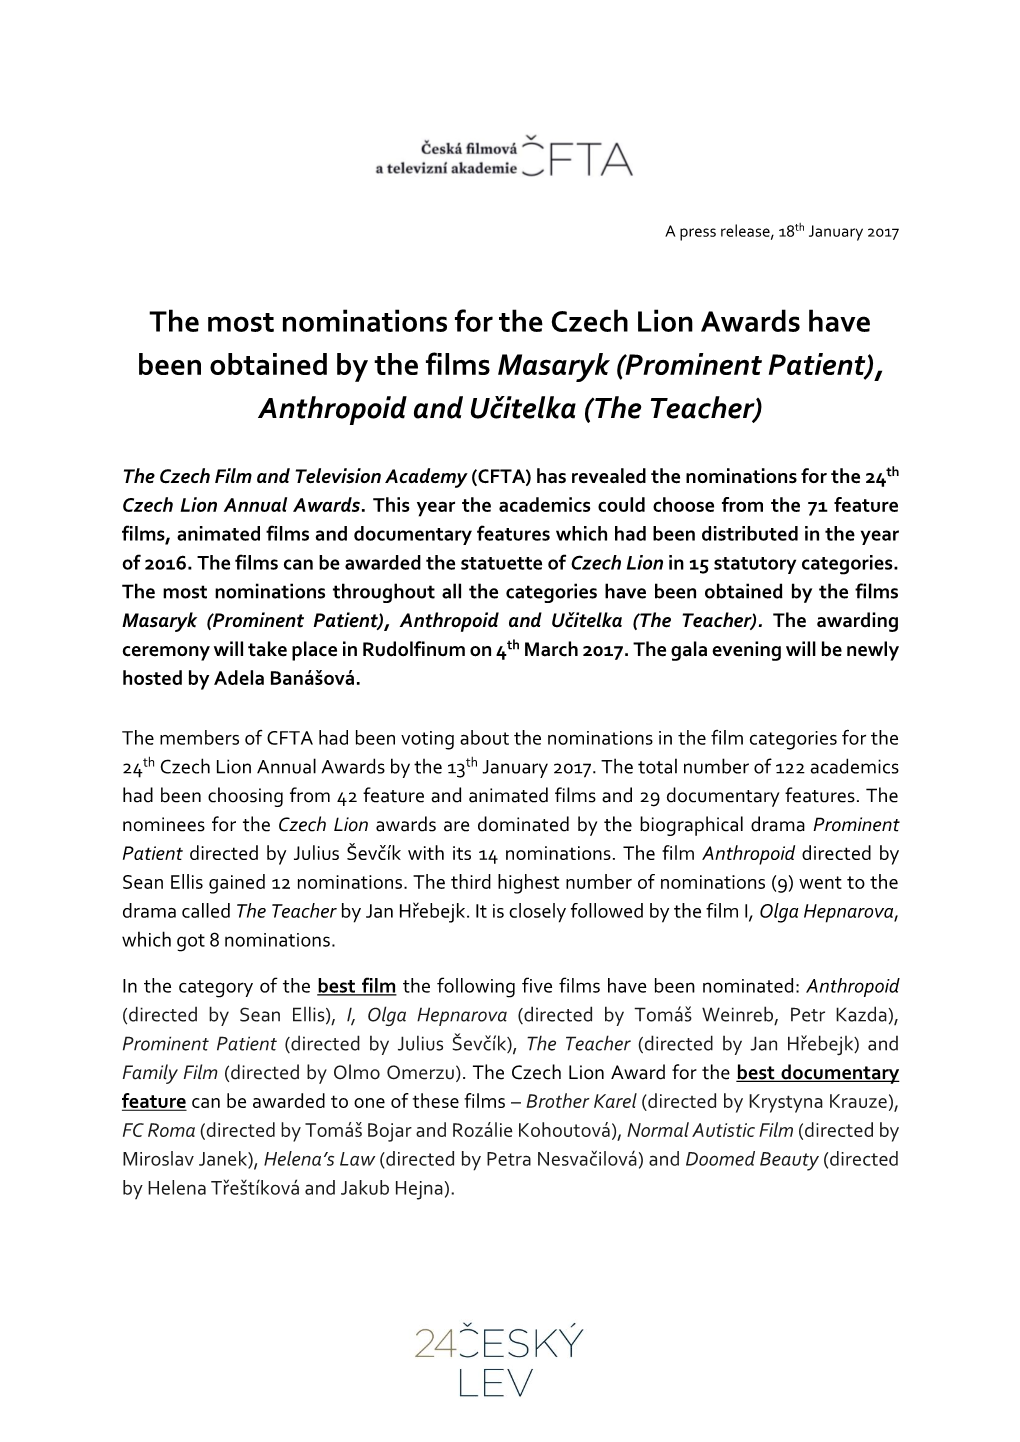 The Most Nominations for the Czech Lion Awards Have Been Obtained by the Films Masaryk (Prominent Patient), Anthropoid and Učitelka (The Teacher)